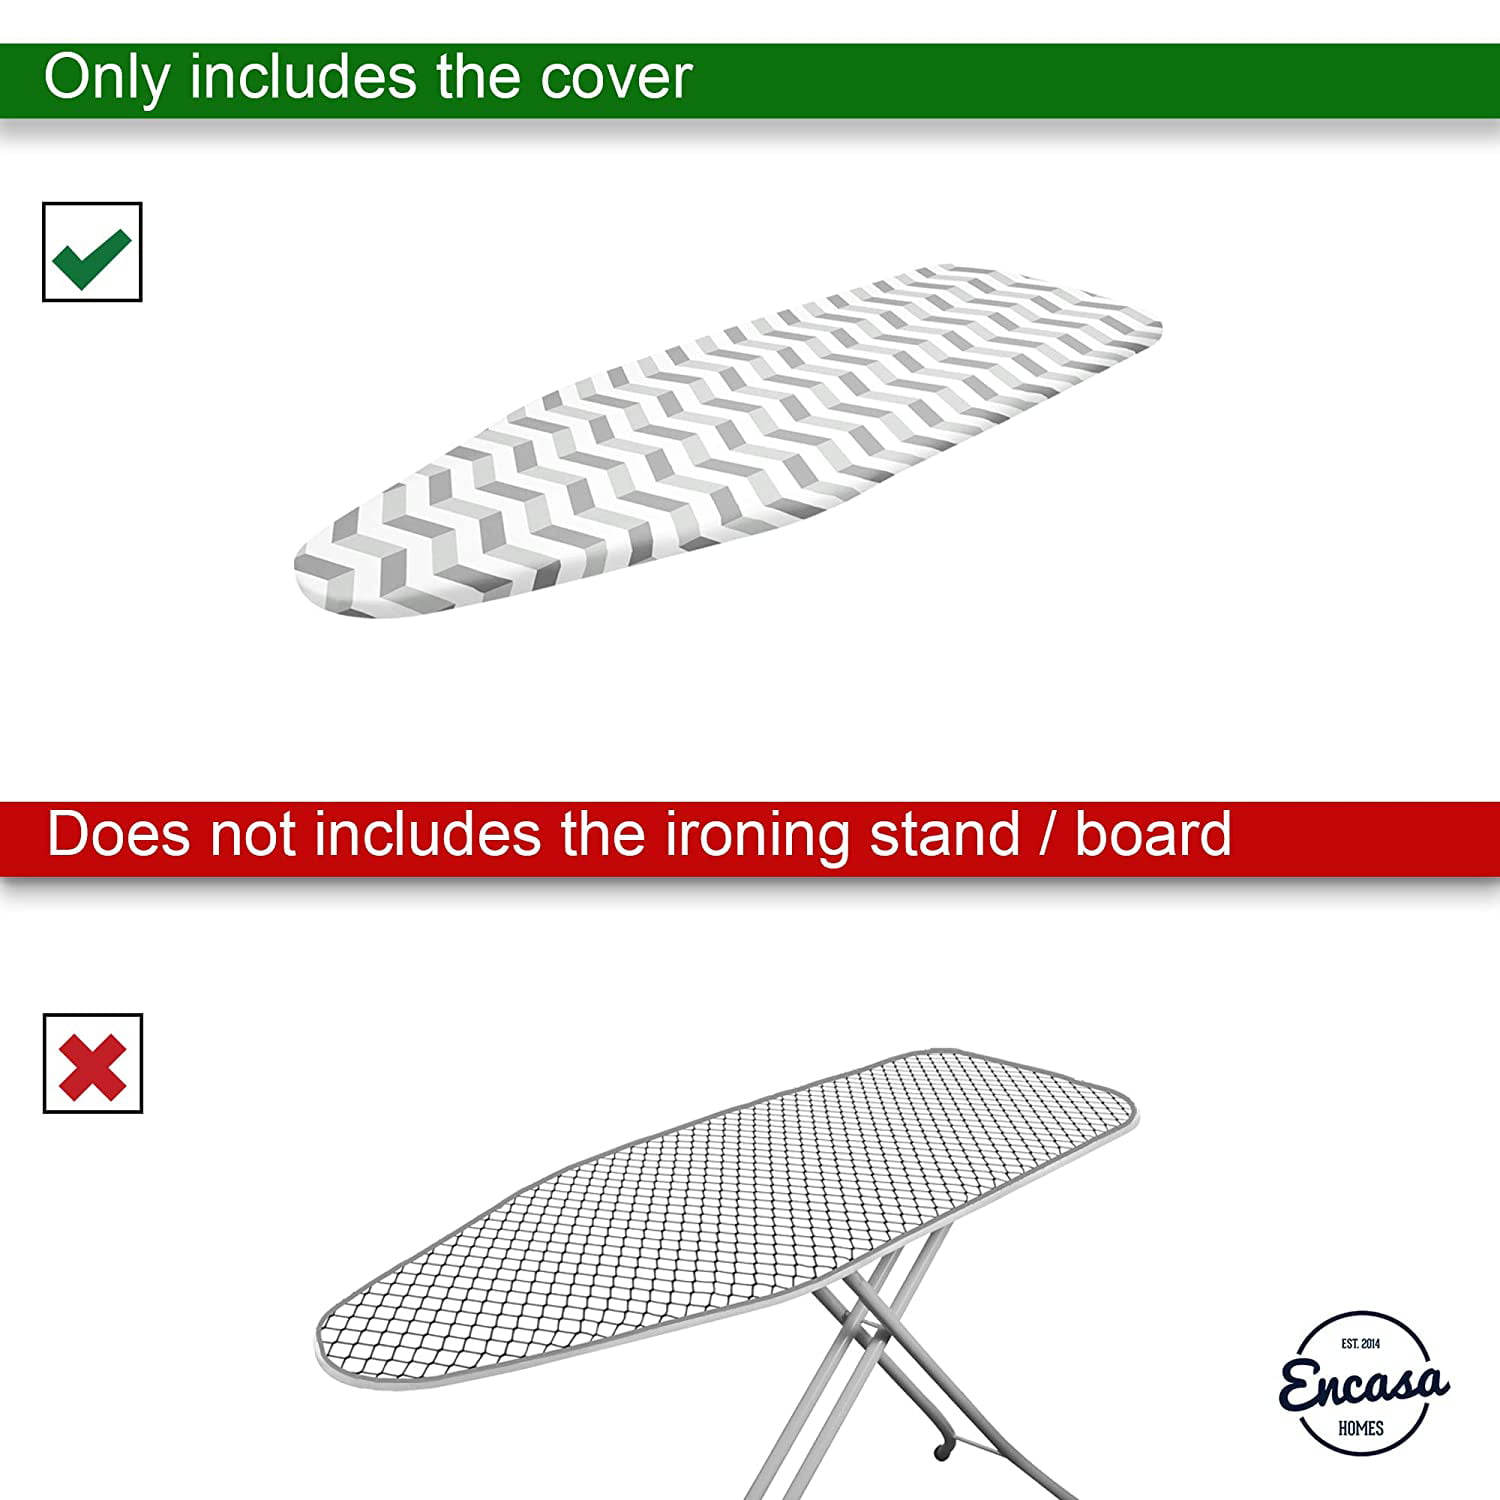 Zig Zag Encasa Homes Replacement Ironing Board Cover with Thick Felt Pad Fits Standard Wide Boards of 18 x 49 inch Scorch & Stain Resistant Drawstring Tightening, Printed 